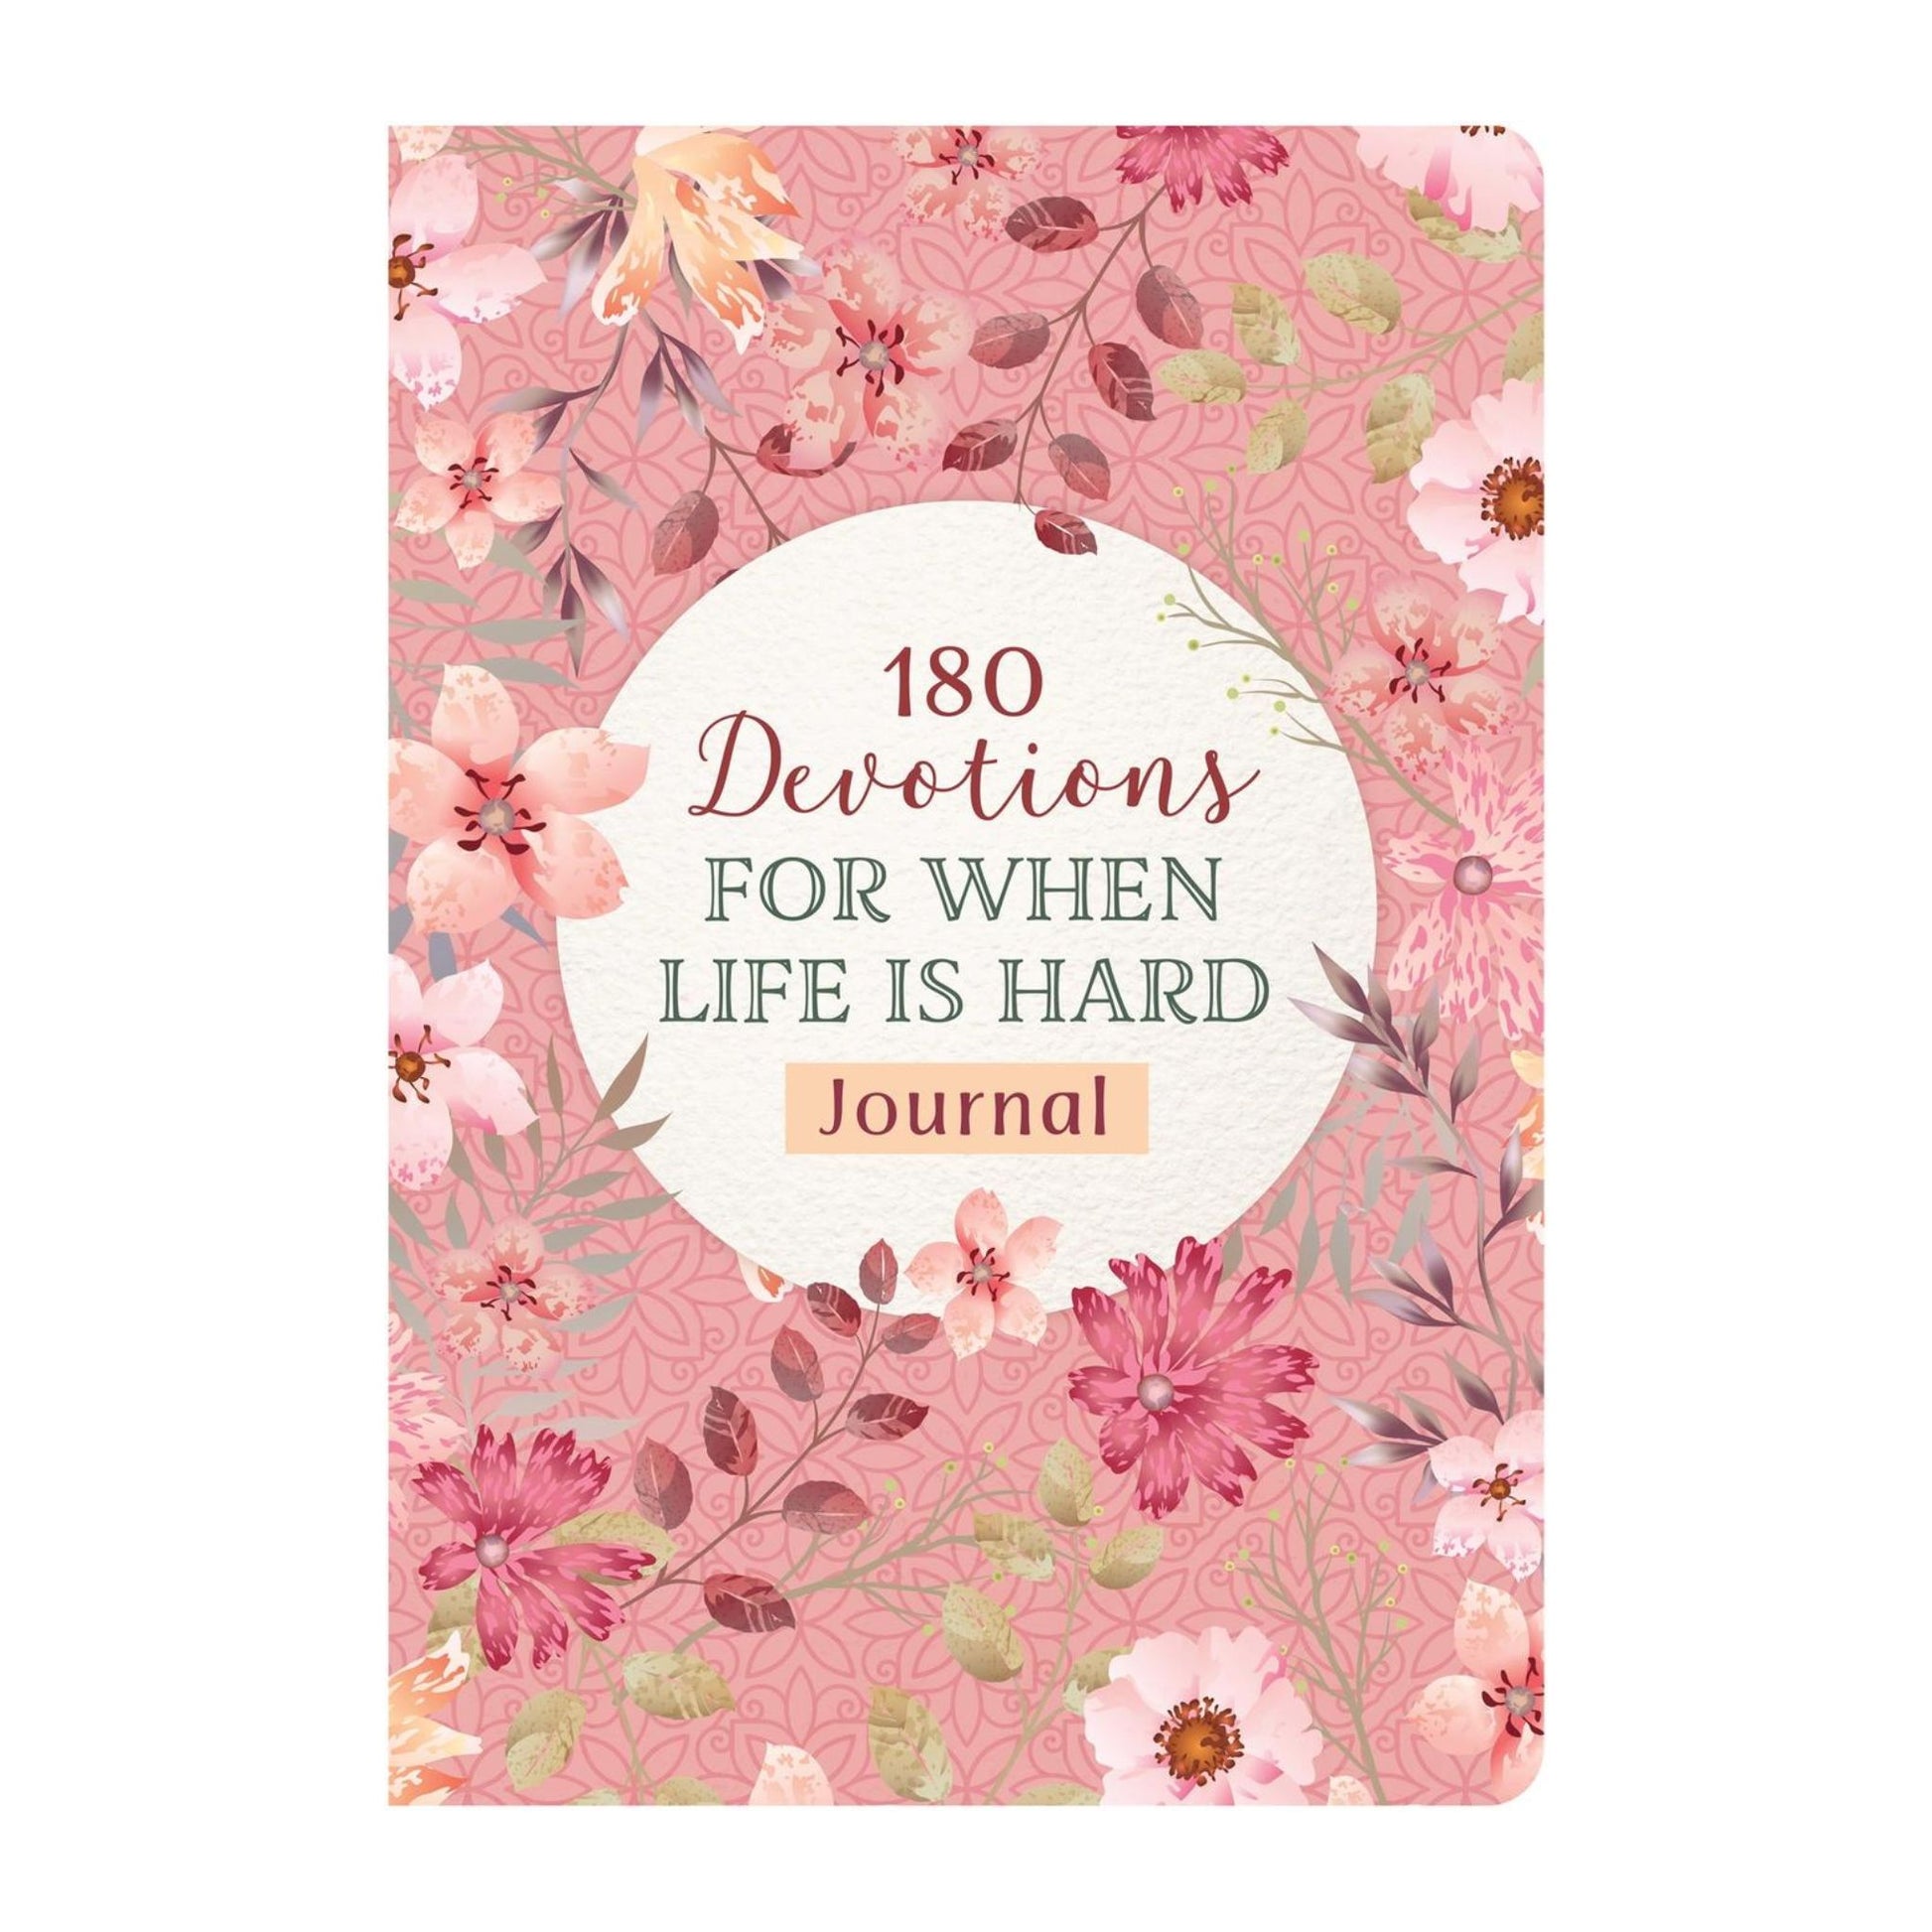 Devotional journal cover with '180 Devotions for When Life Is Challenging' title